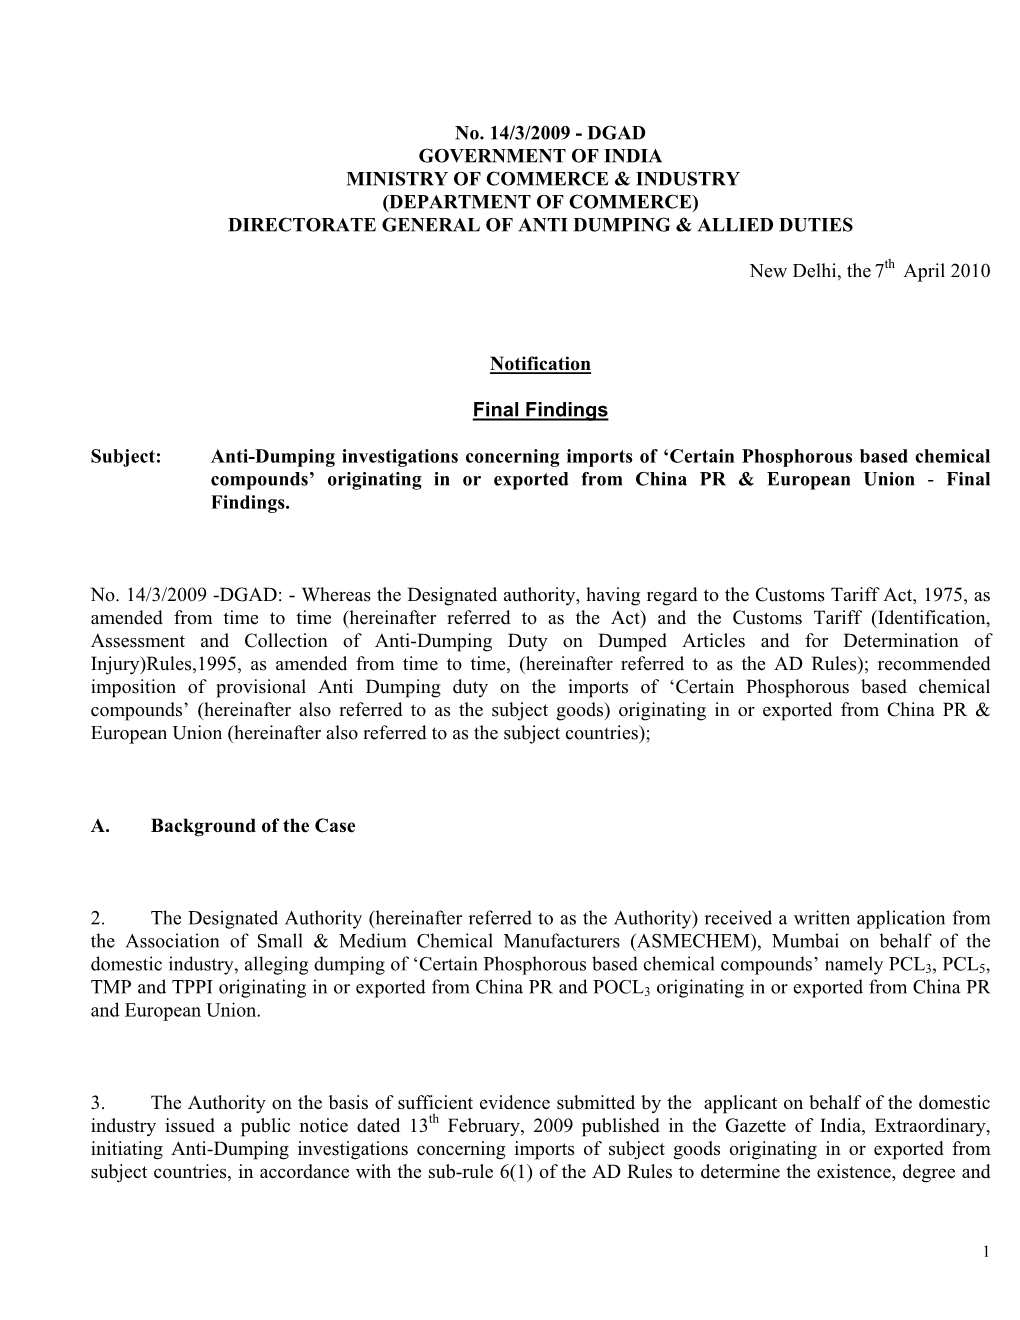 No. 14/3/2009 - DGAD GOVERNMENT of INDIA MINISTRY of COMMERCE & INDUSTRY (DEPARTMENT of COMMERCE) DIRECTORATE GENERAL of ANTI DUMPING & ALLIED DUTIES